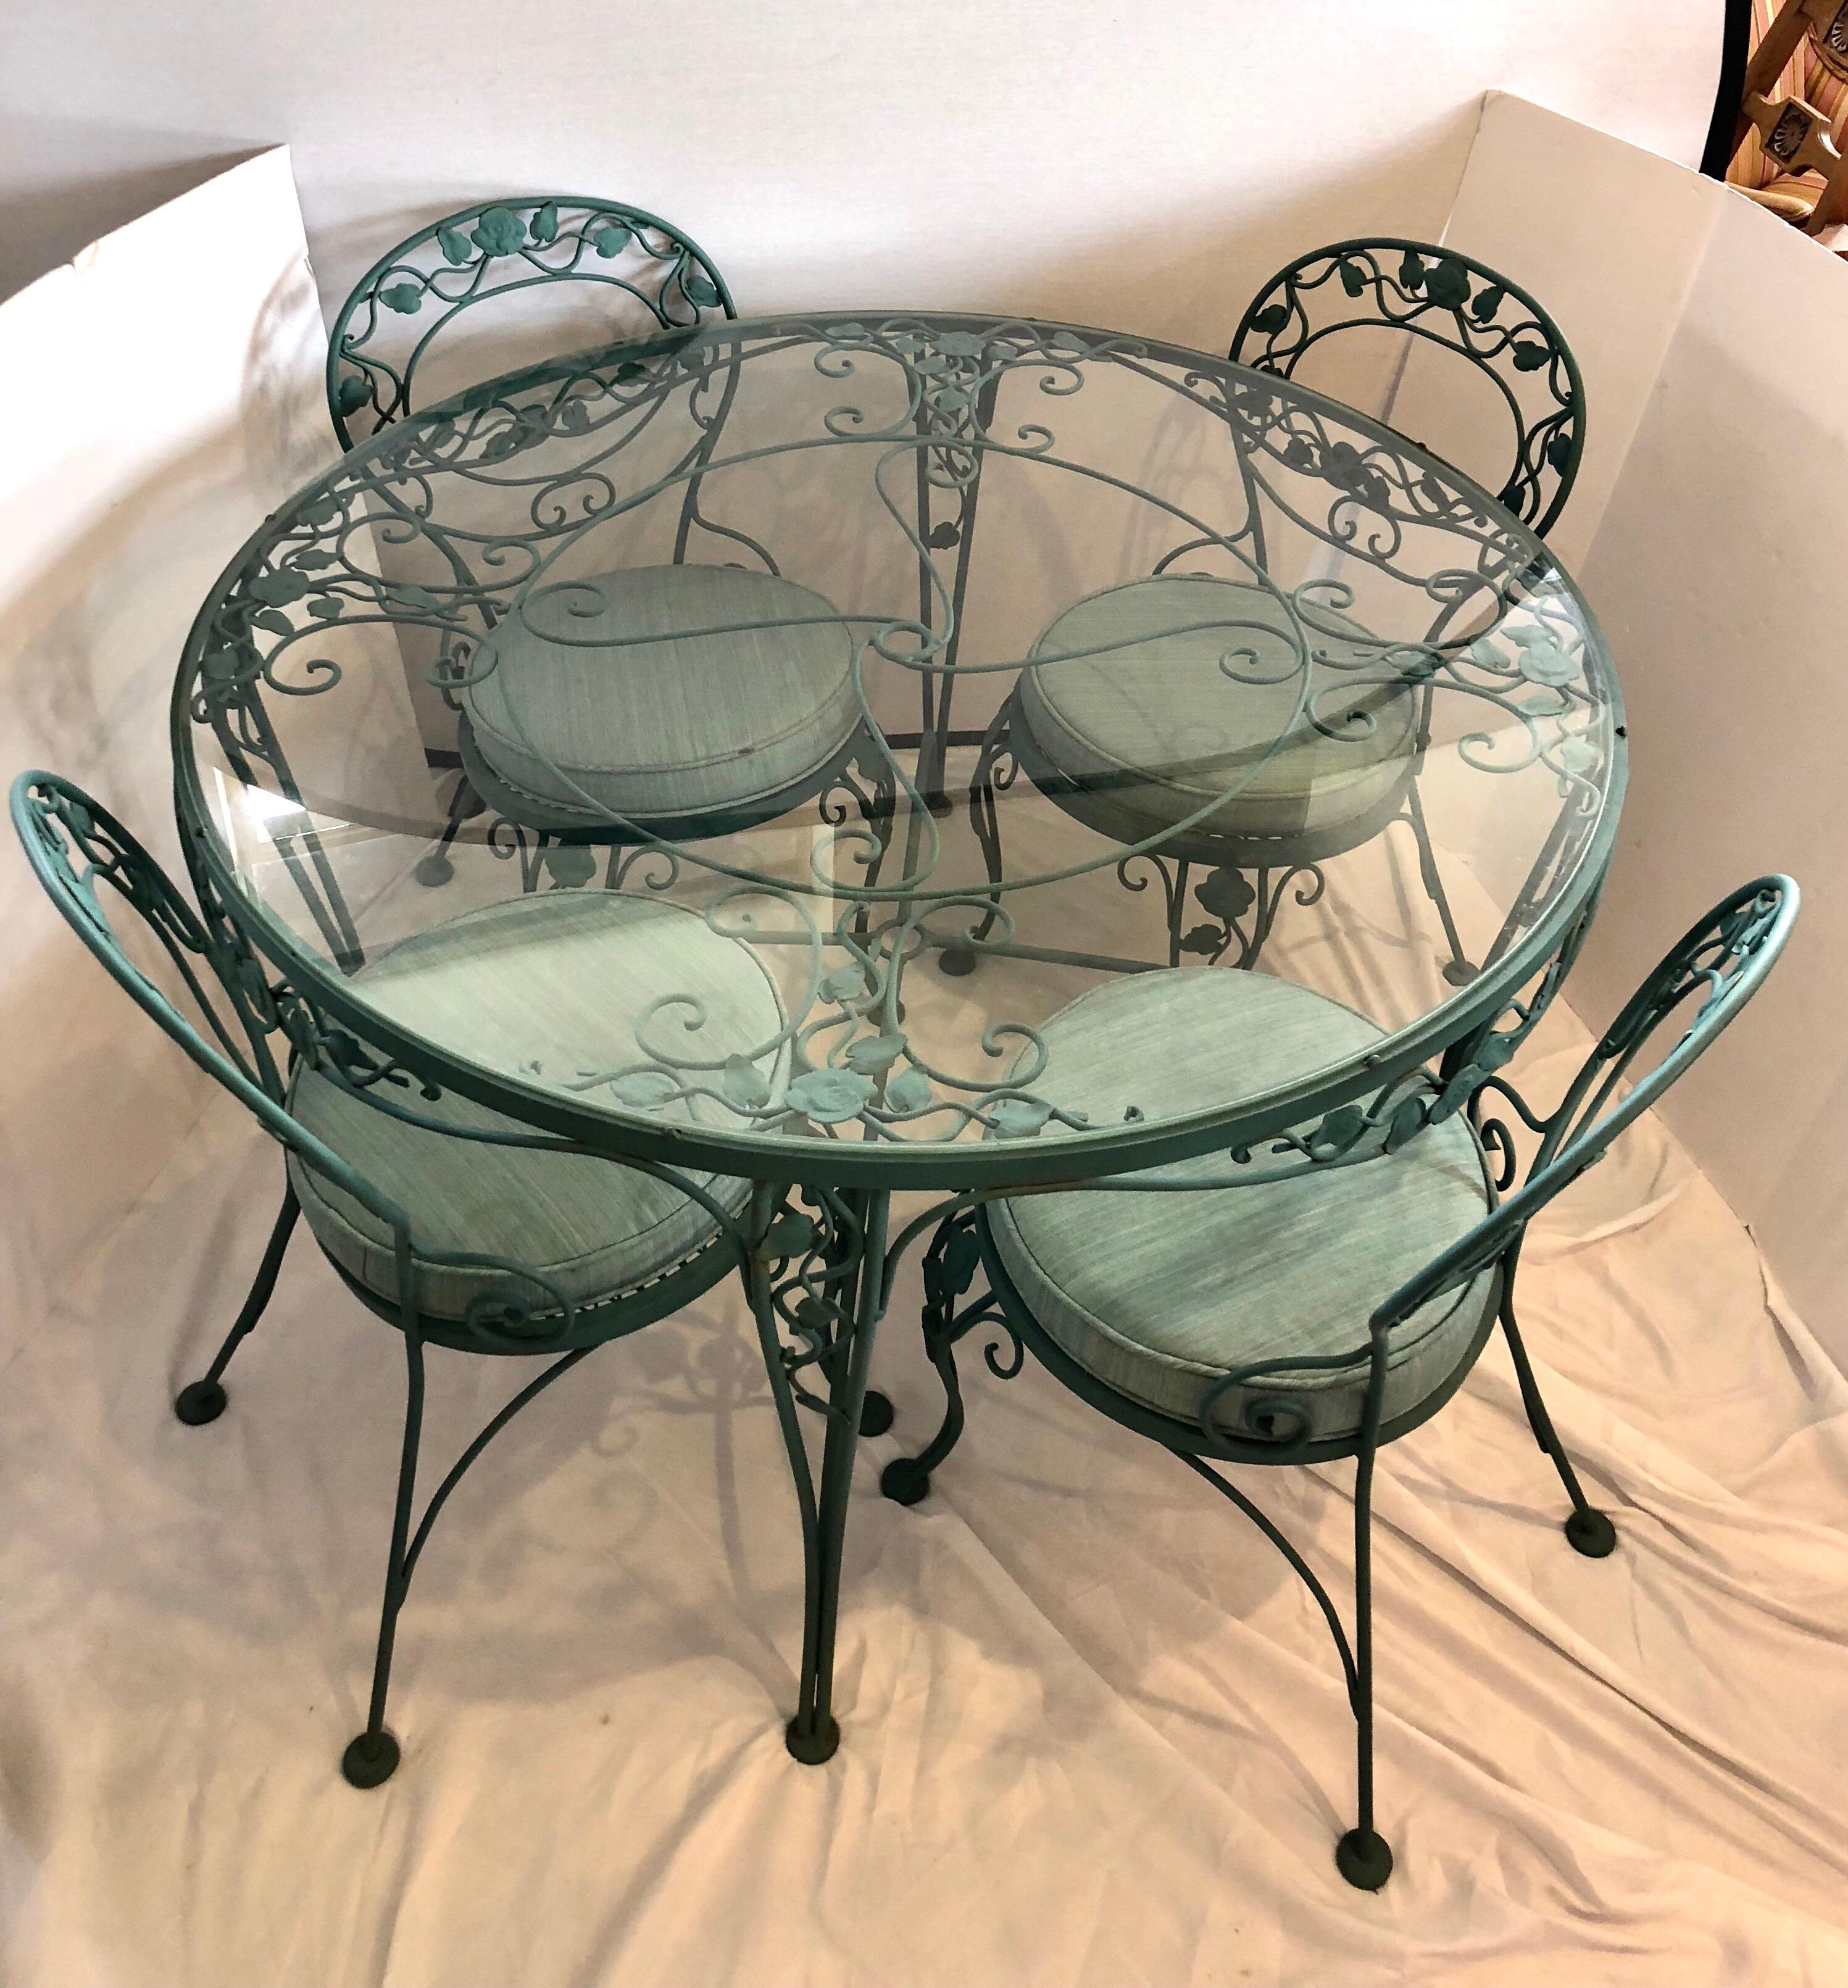 Classic signed Russell Woodard wrought iron patio set with intricate metalwork throughout.
Features fitted glass top that sits on floral metalwork.